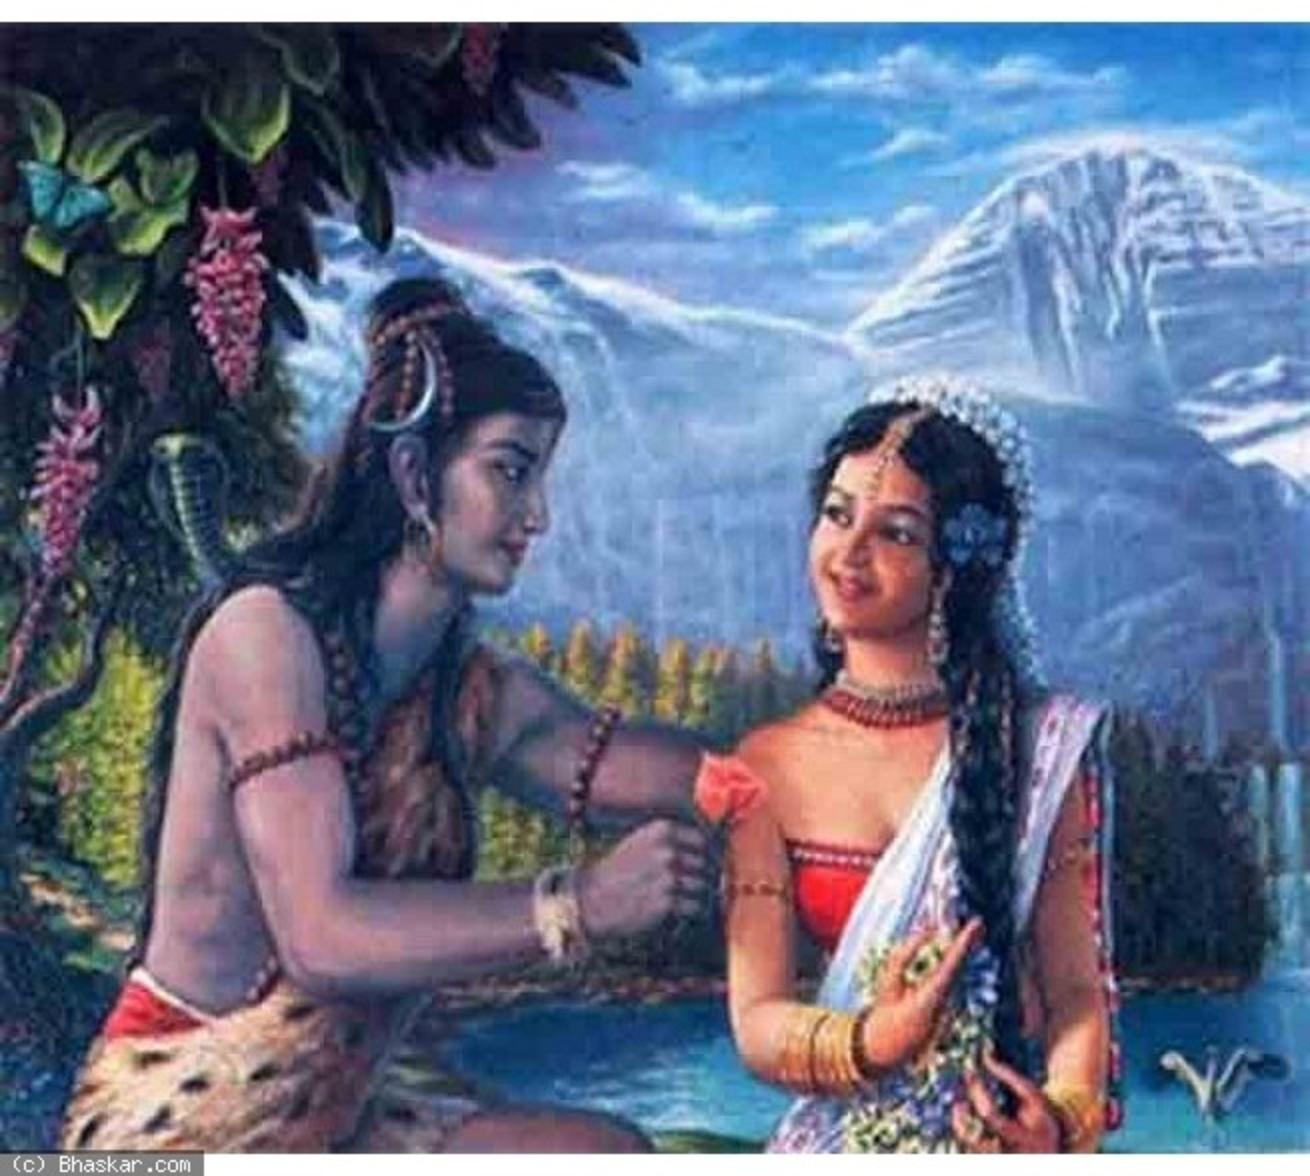 Romantic Images Of Lord Shiva And Parvati - carrotapp